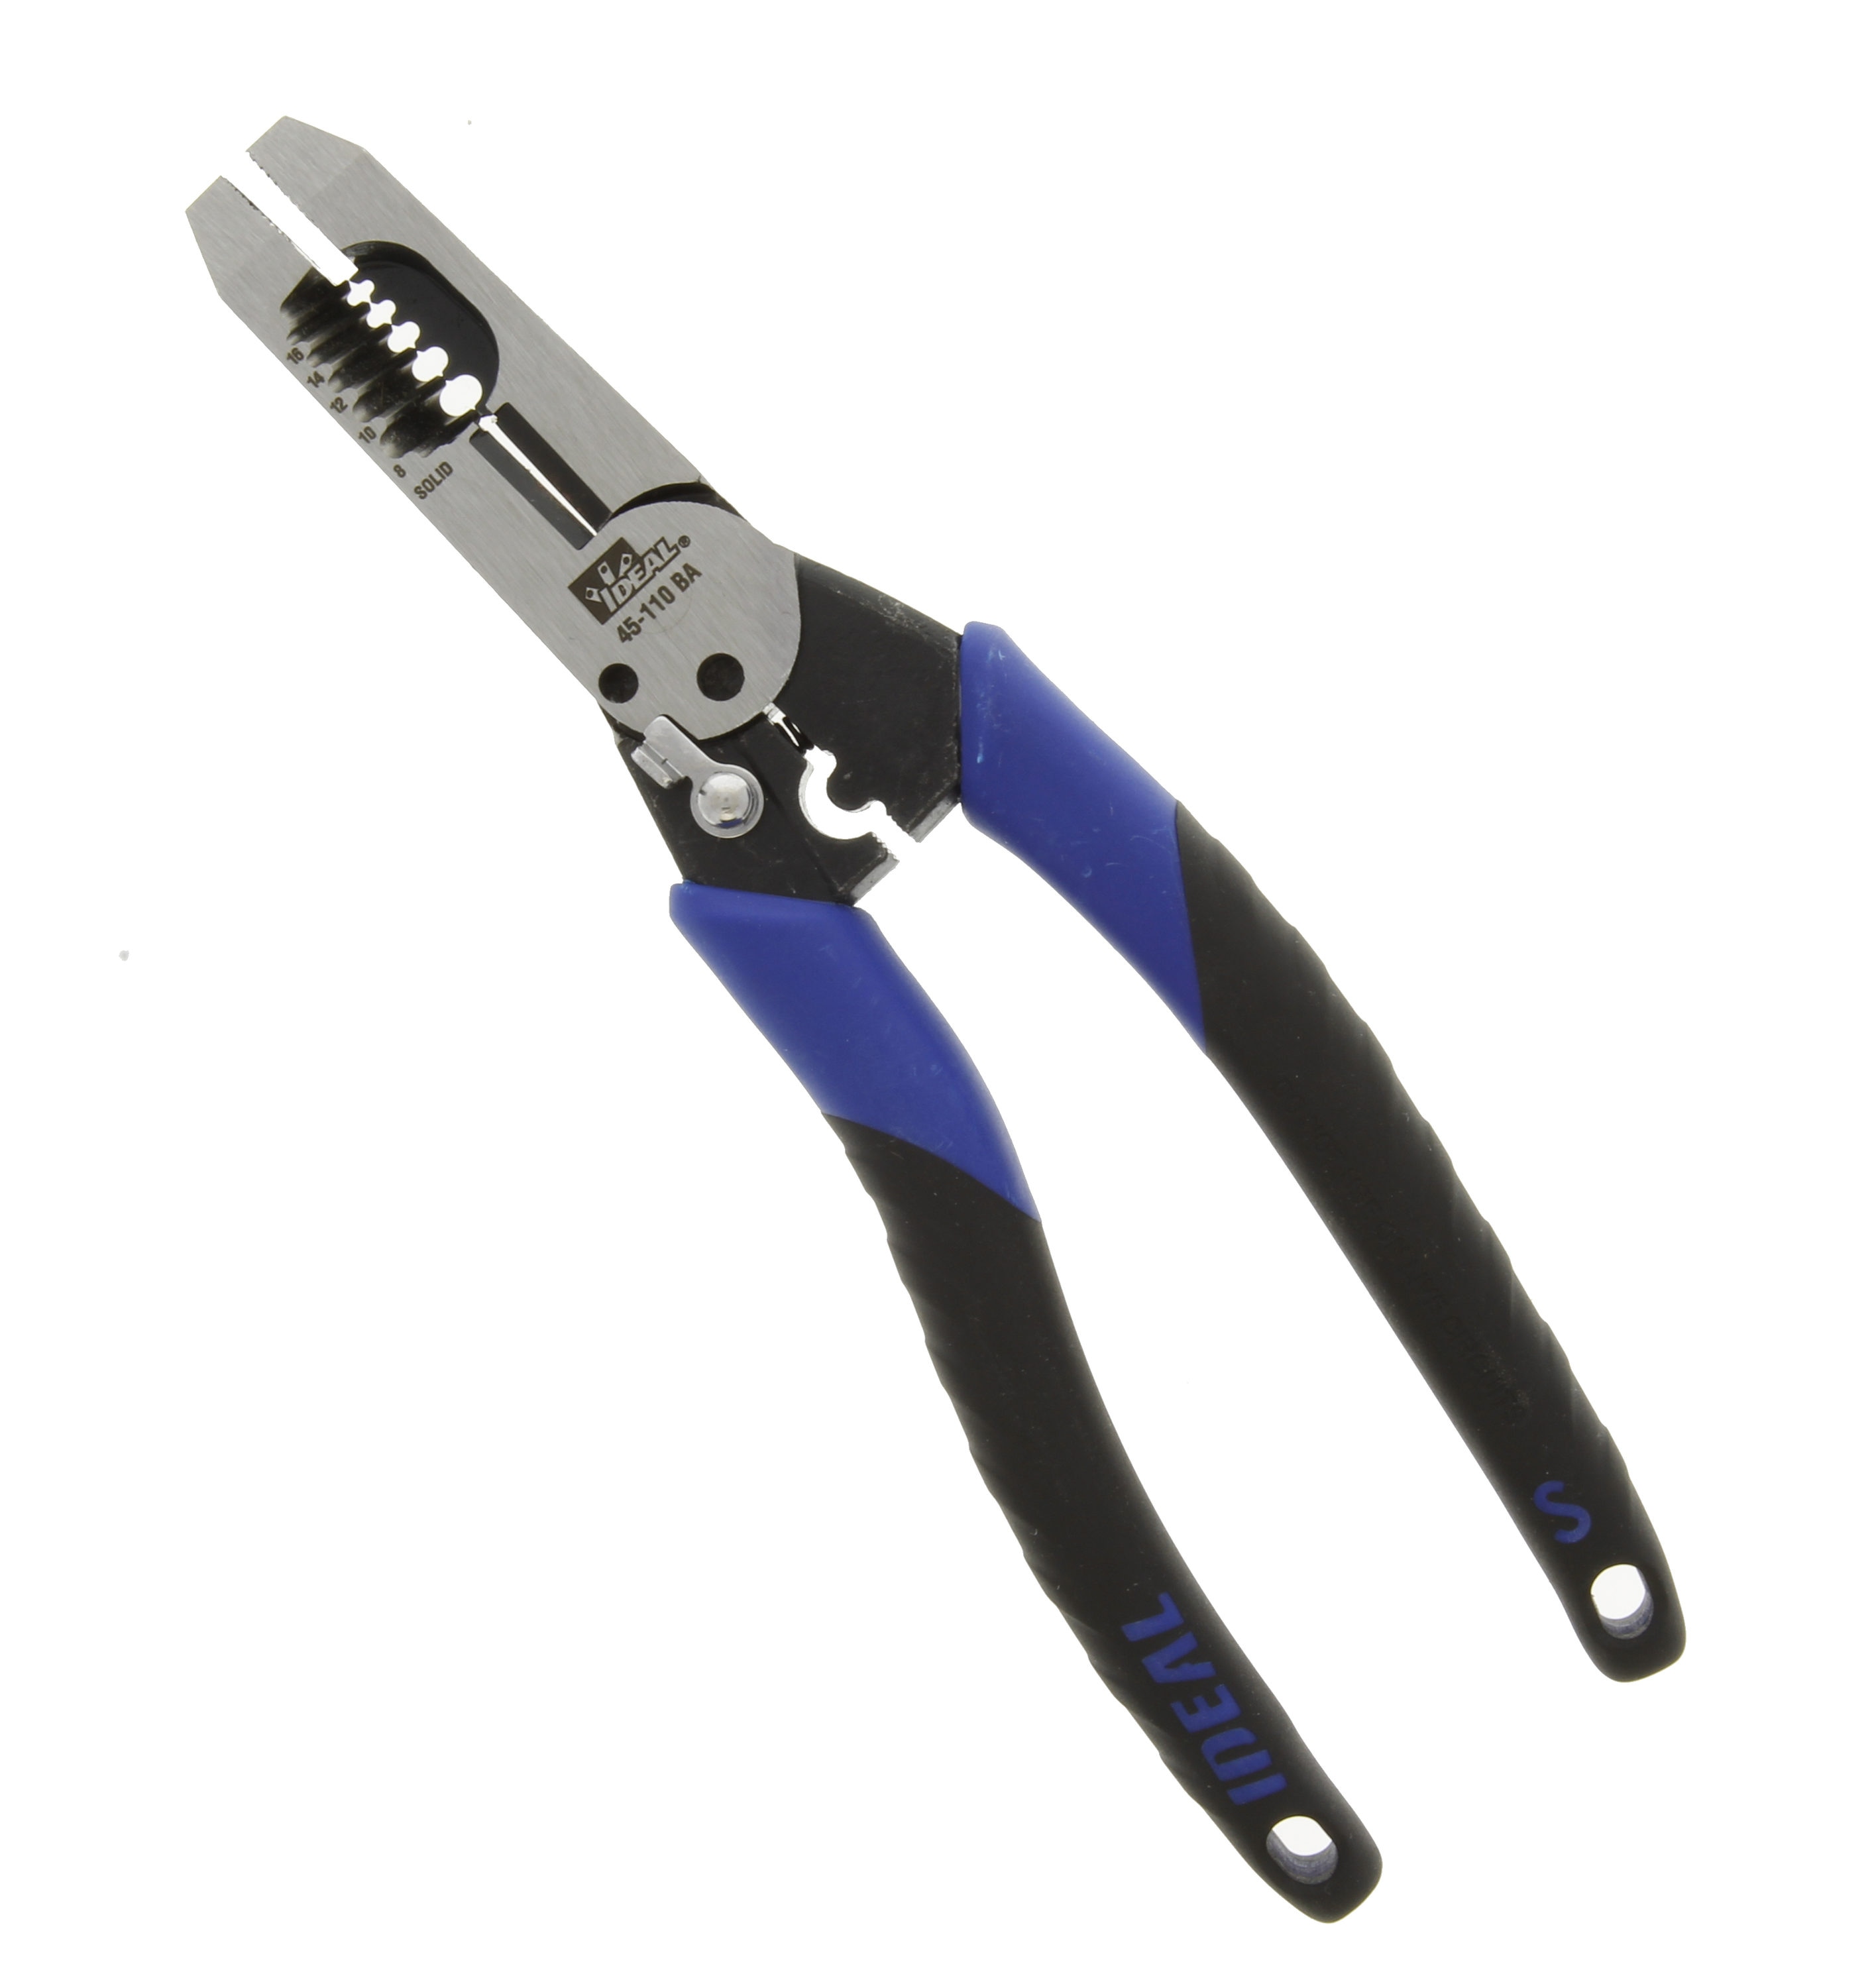 IDEAL Wire Stripper/Cutter/Crimper, 8-16 Awg Solid, 10-18 Awg